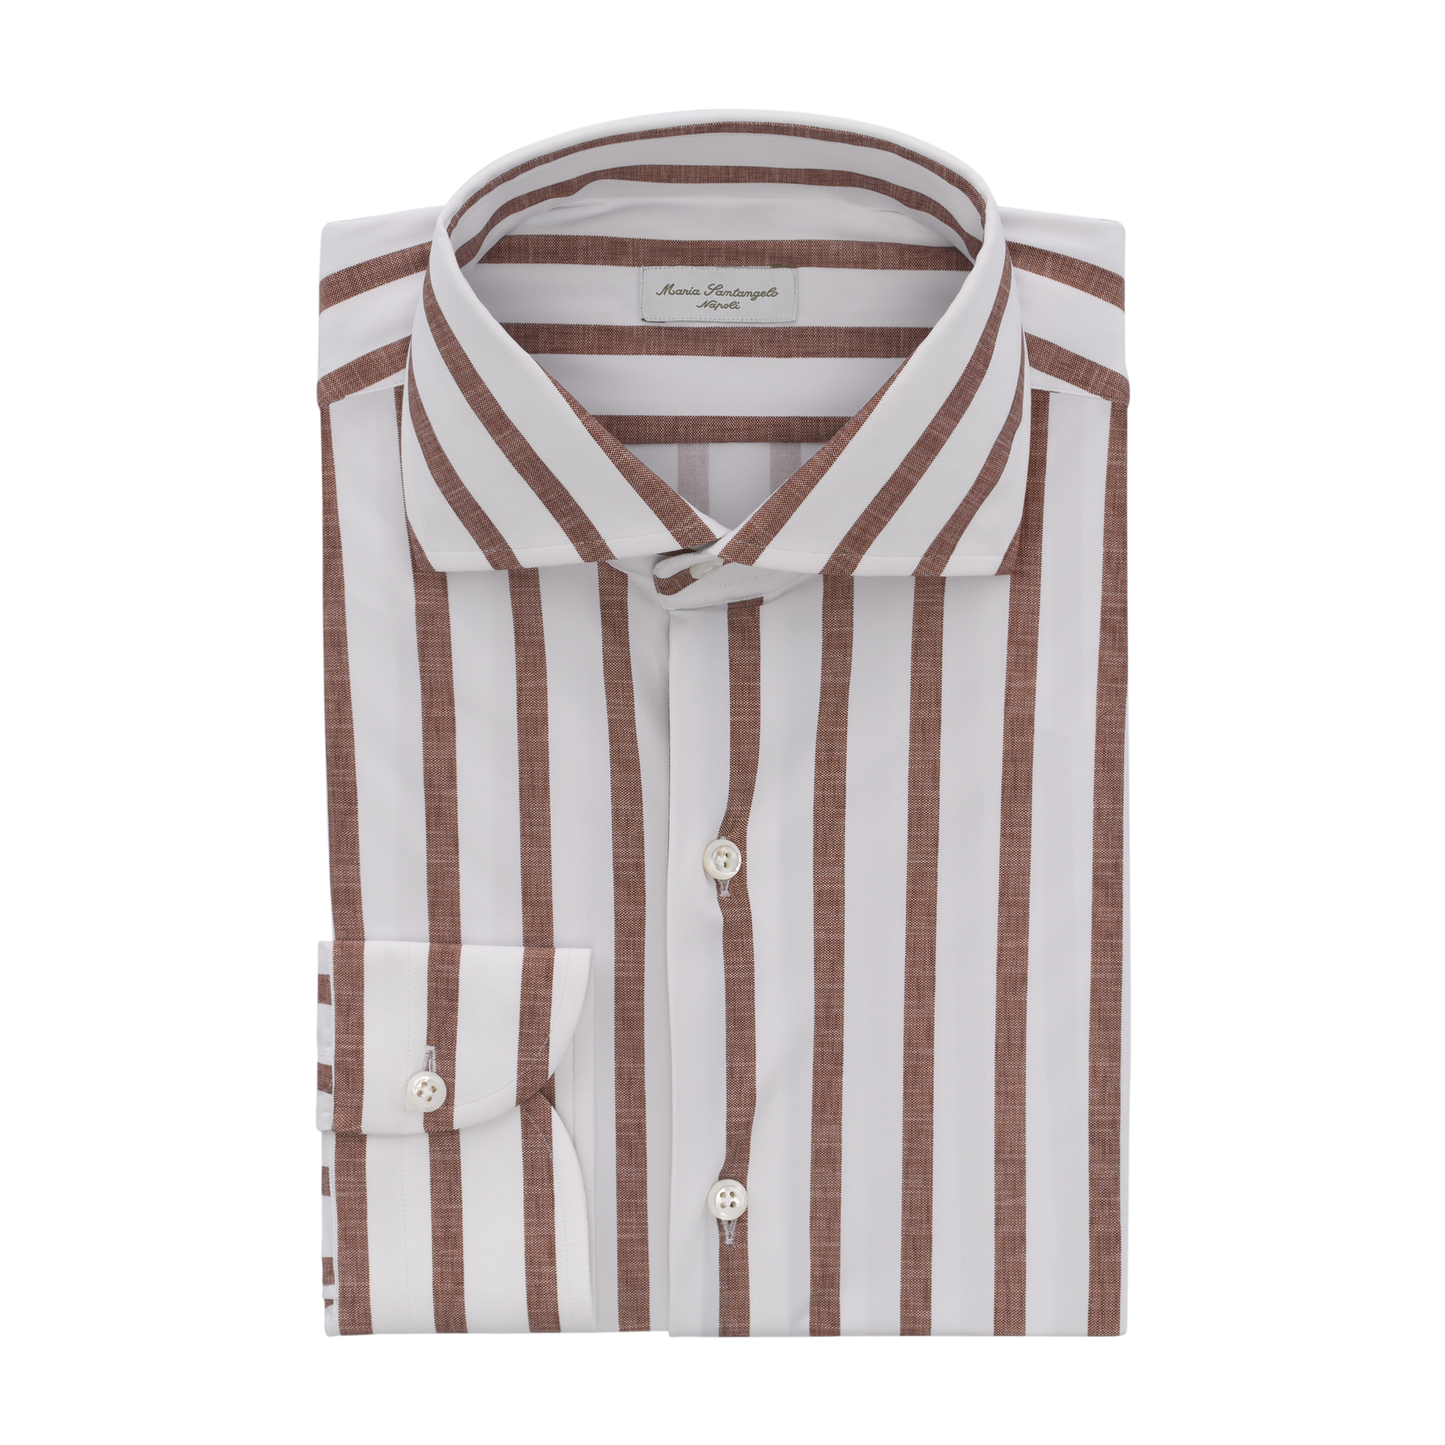 Striped Stretch Shirt in Light Brown and White